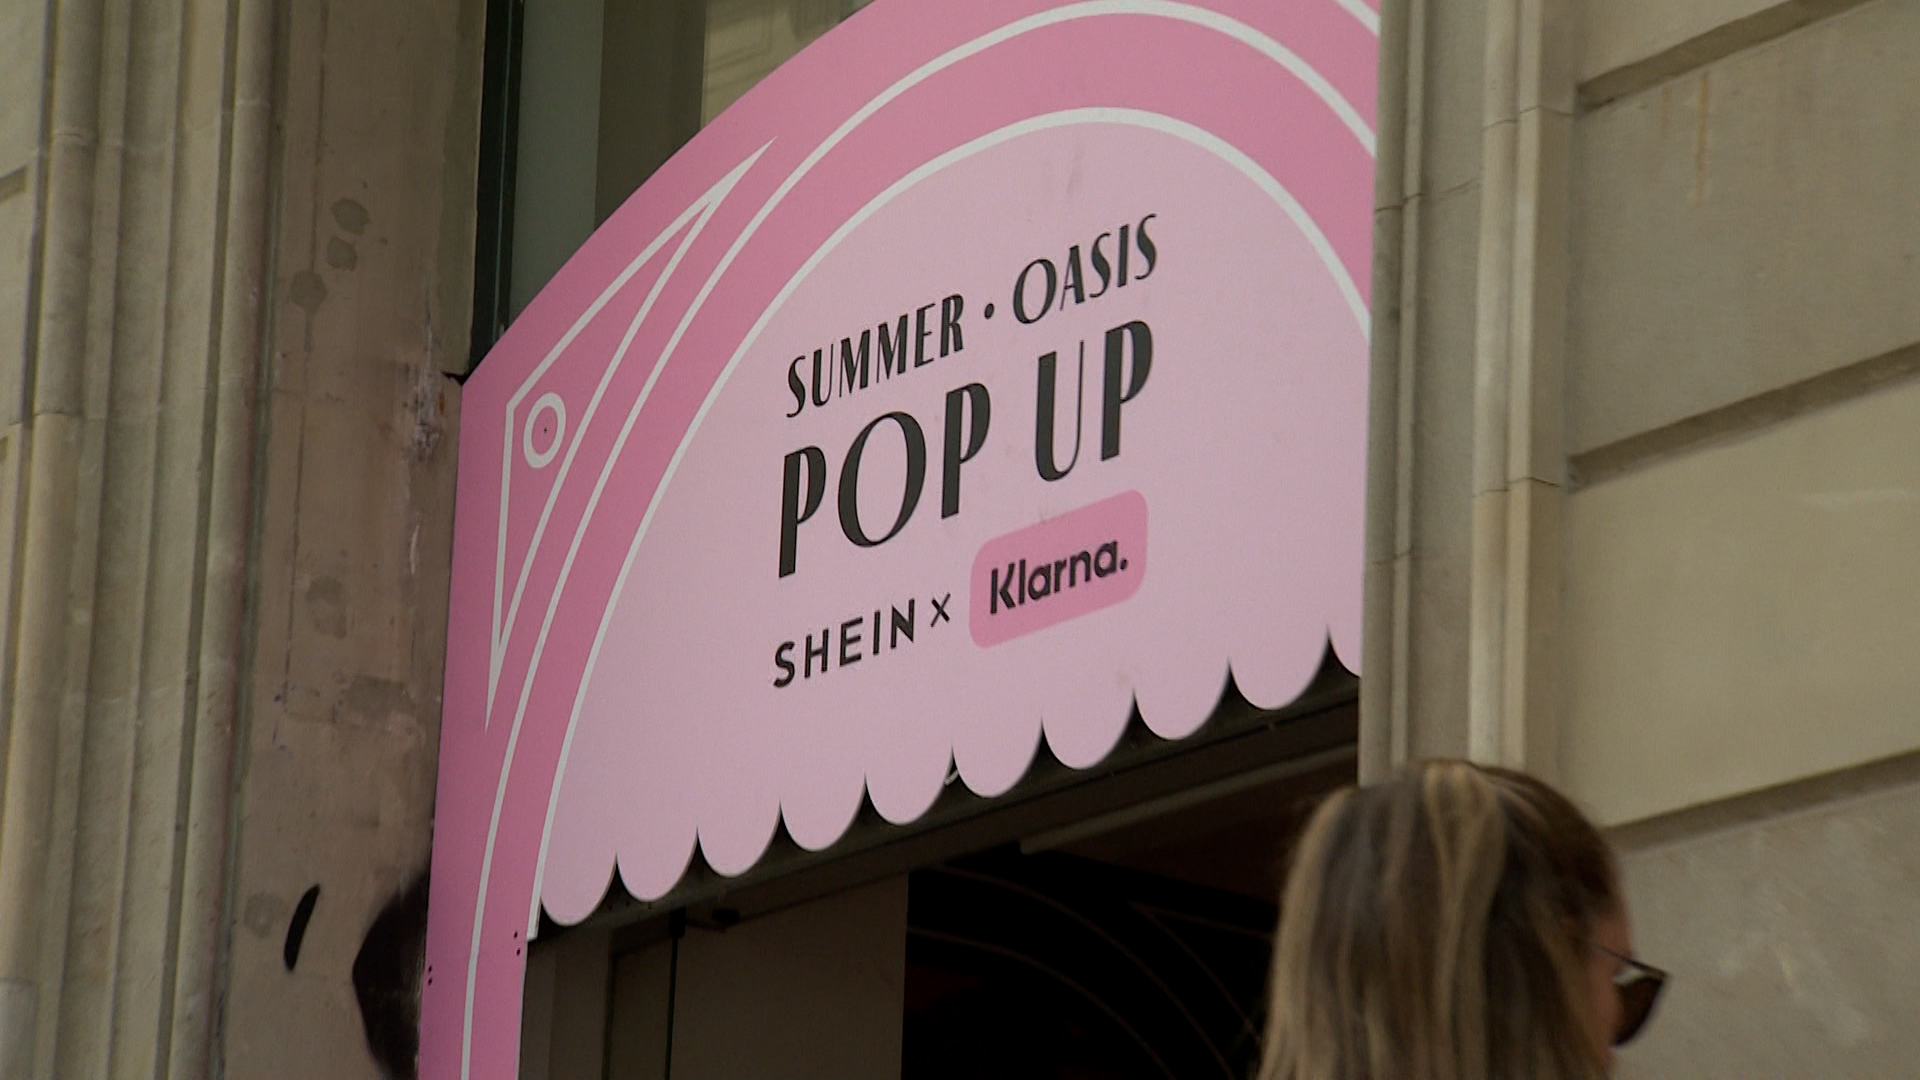 Queues at the new Shein store in Barcelona during its first weekend